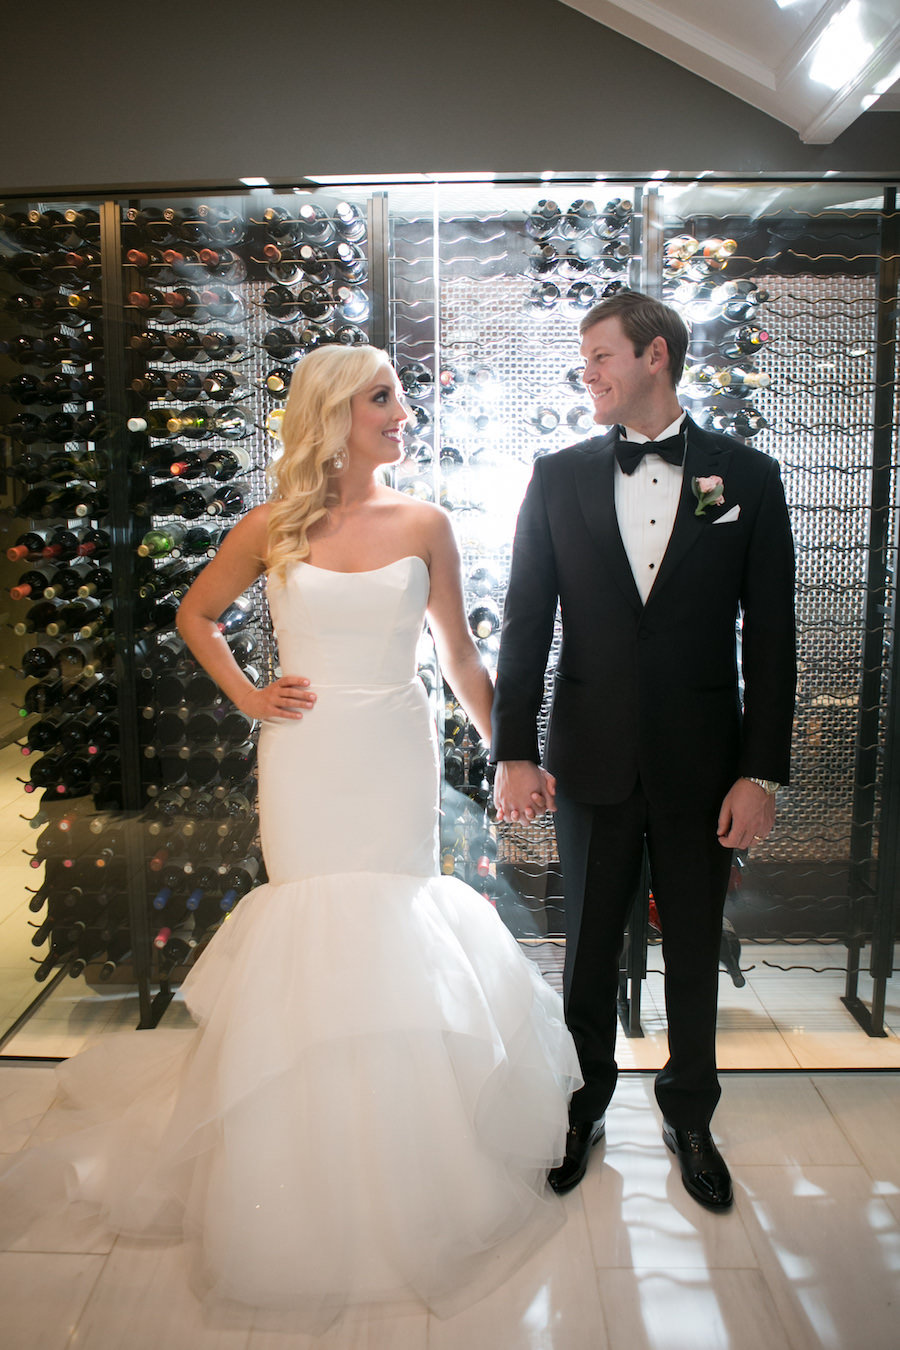 Bride and Groom Wedding Portrait in Wine Room | Wedding Venue The Tampa Club | Tampa Wedding Photographer Carrie Wildes Photography